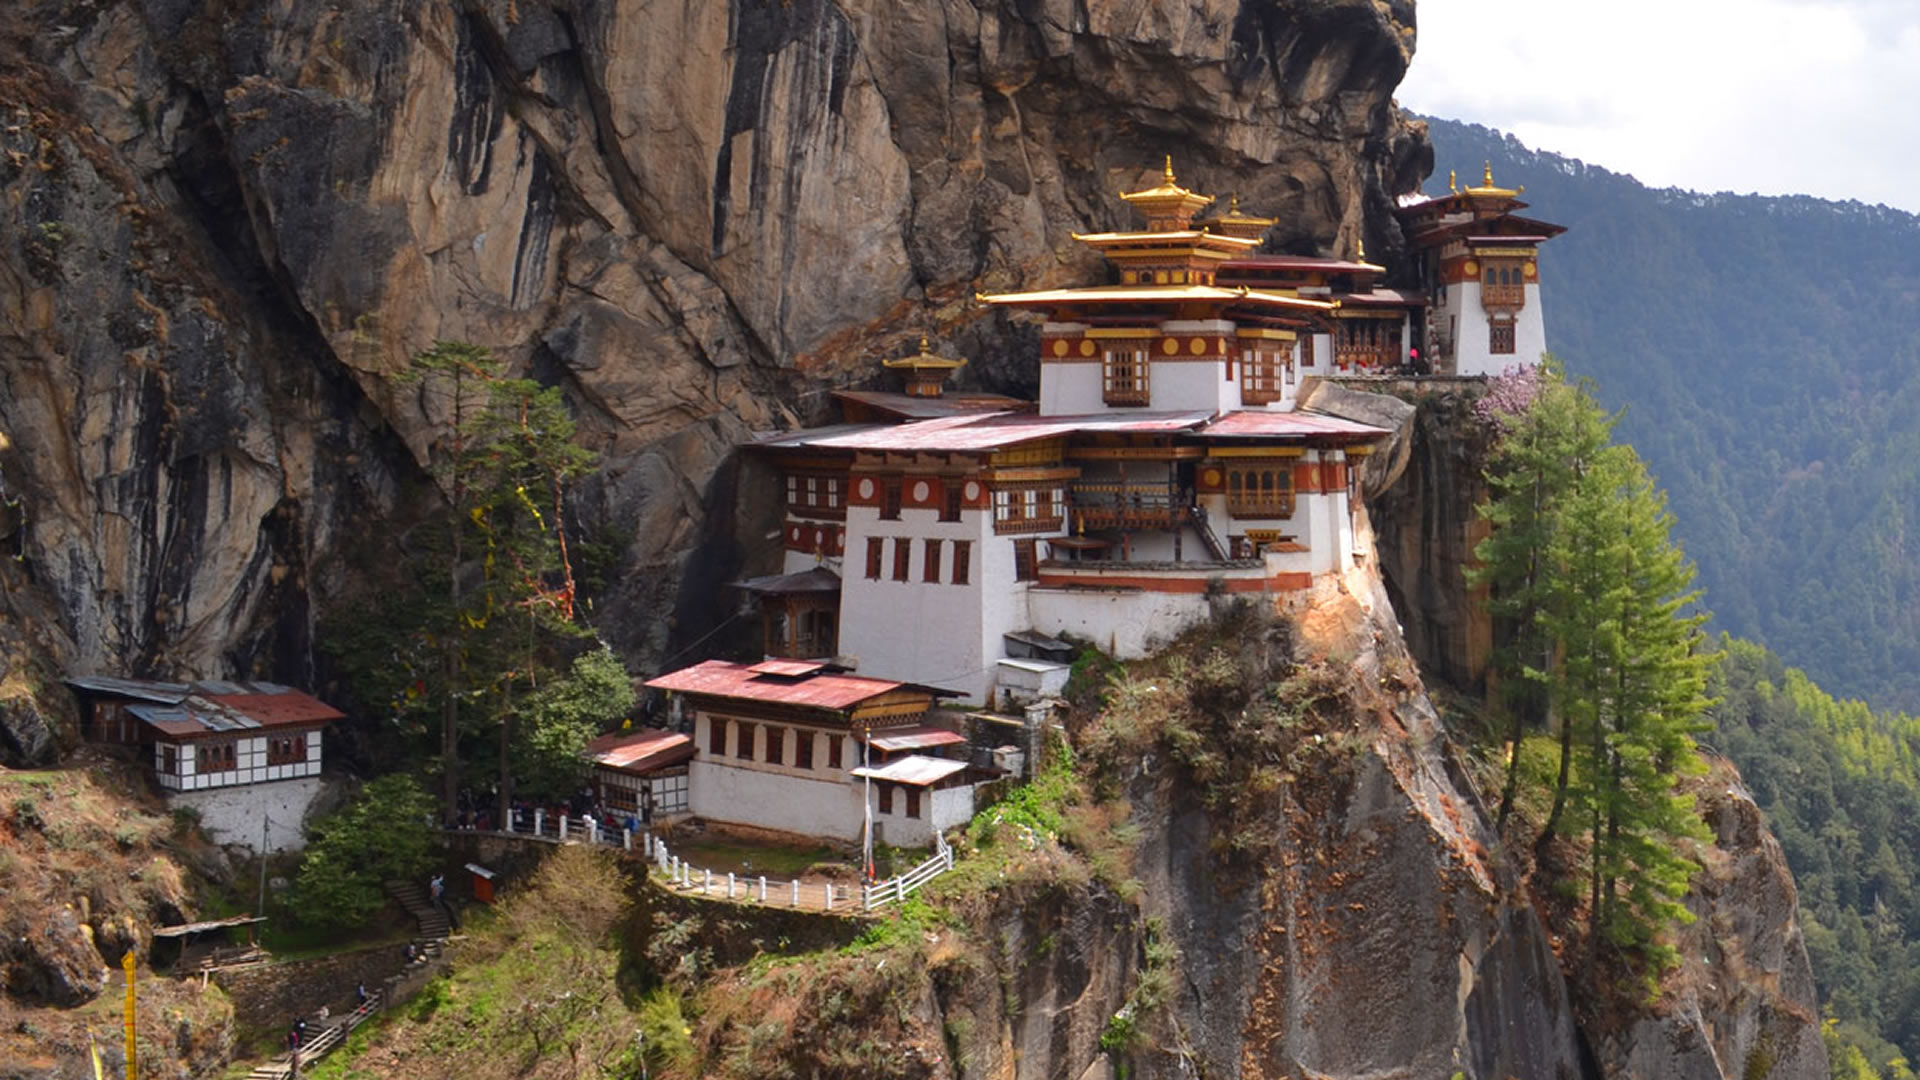 Gross National Happiness in the Himalayas